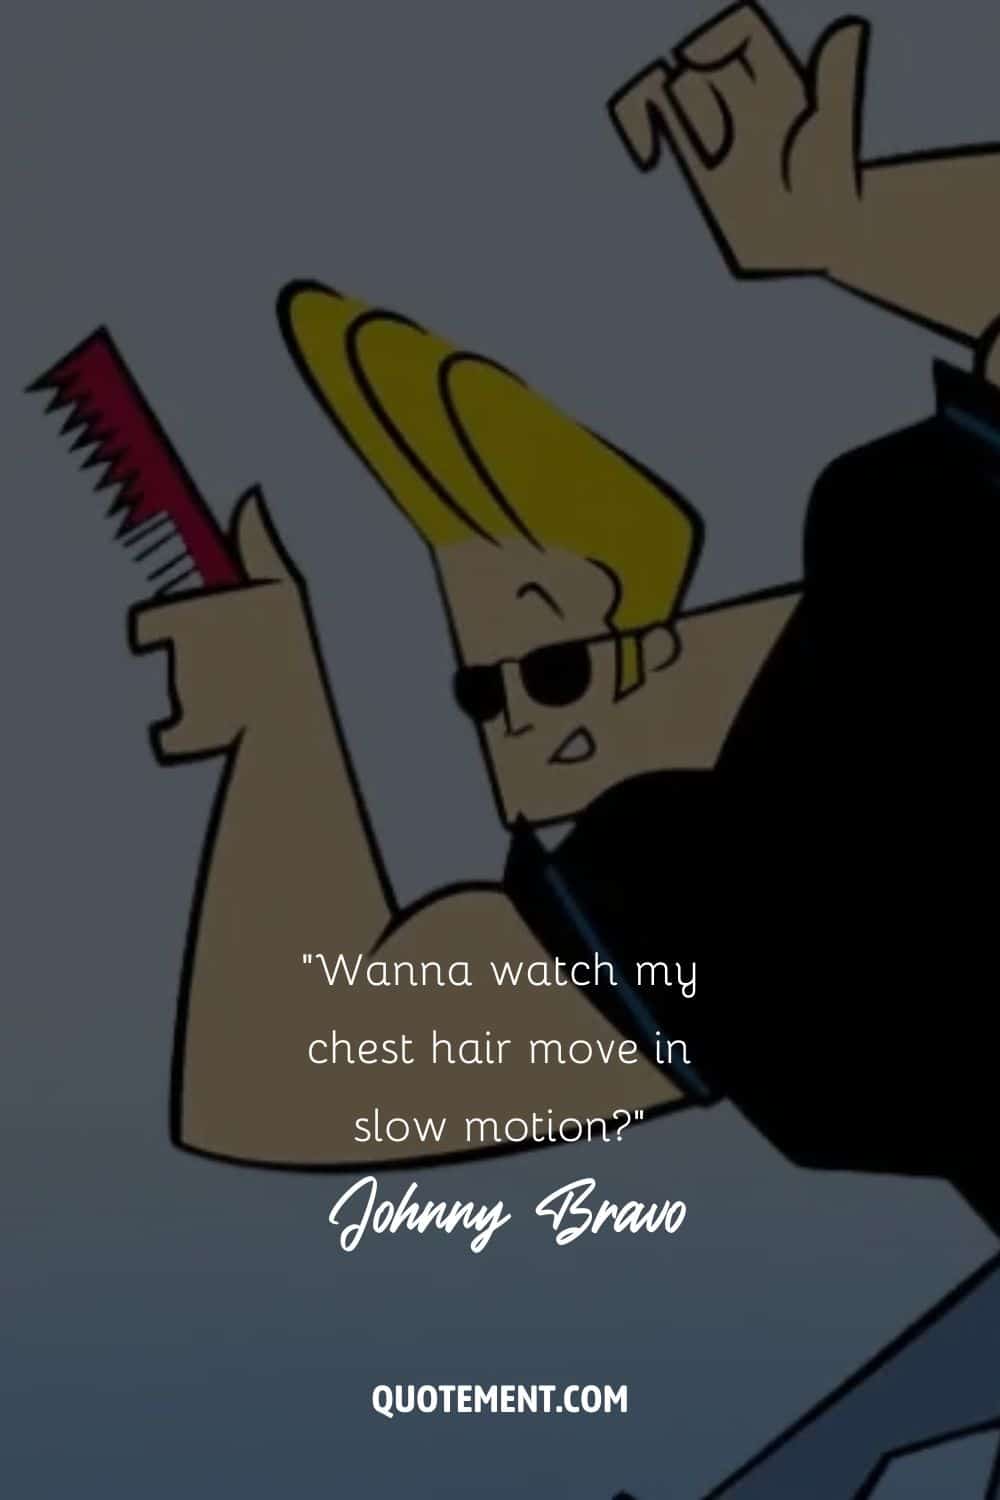 Johnny Bravo with a comb in his hand
